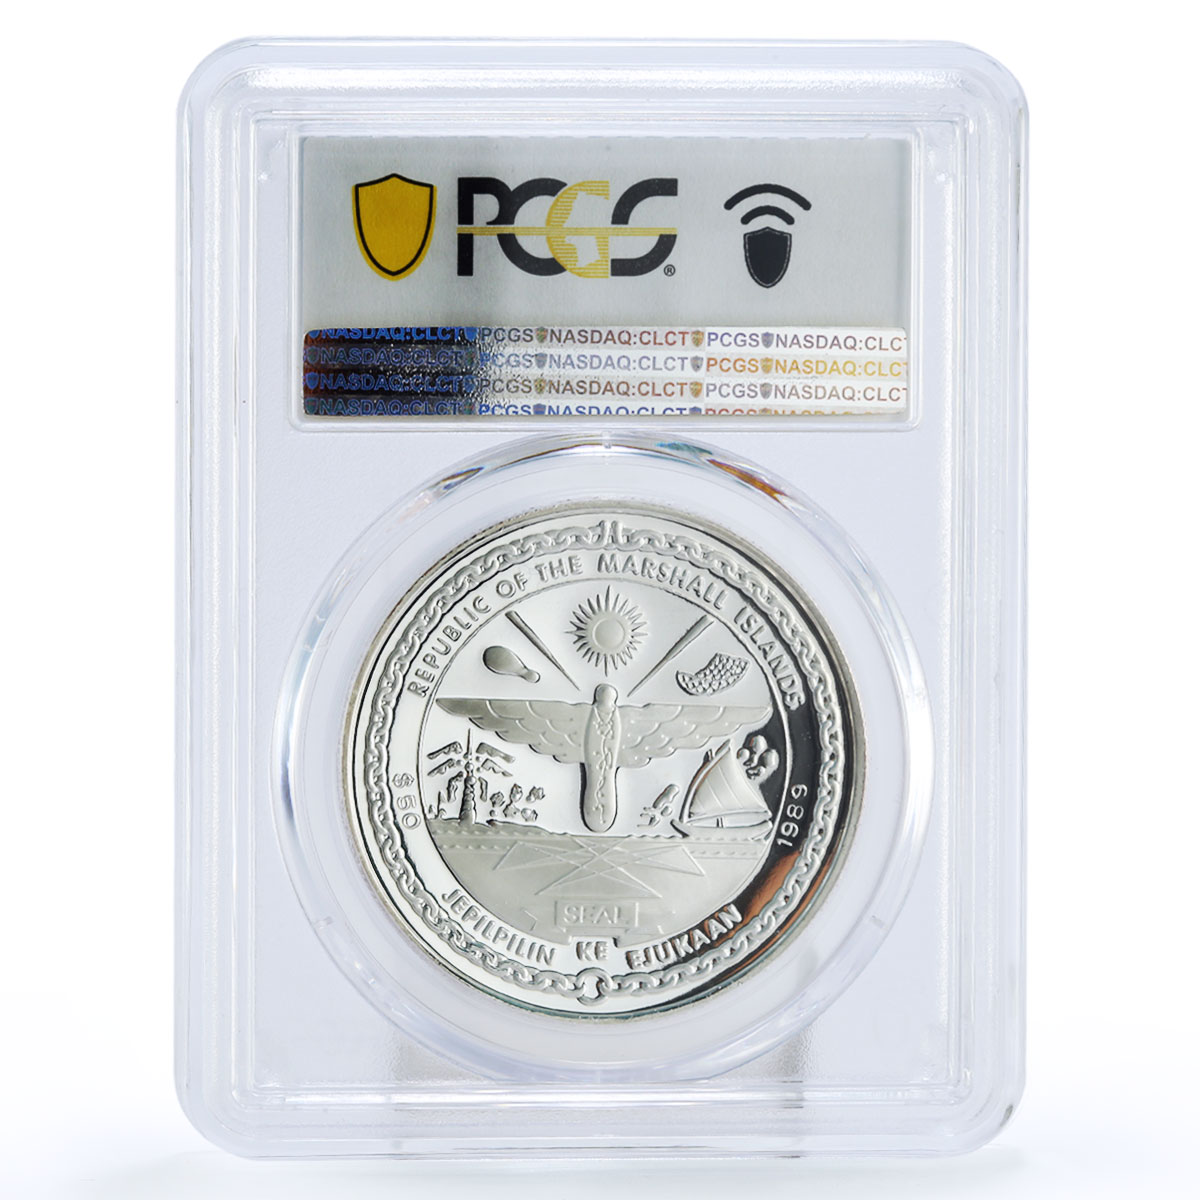 Marshall Islands 50 $ First Soft Landing on Moon PR68 PCGS silver coin 1989